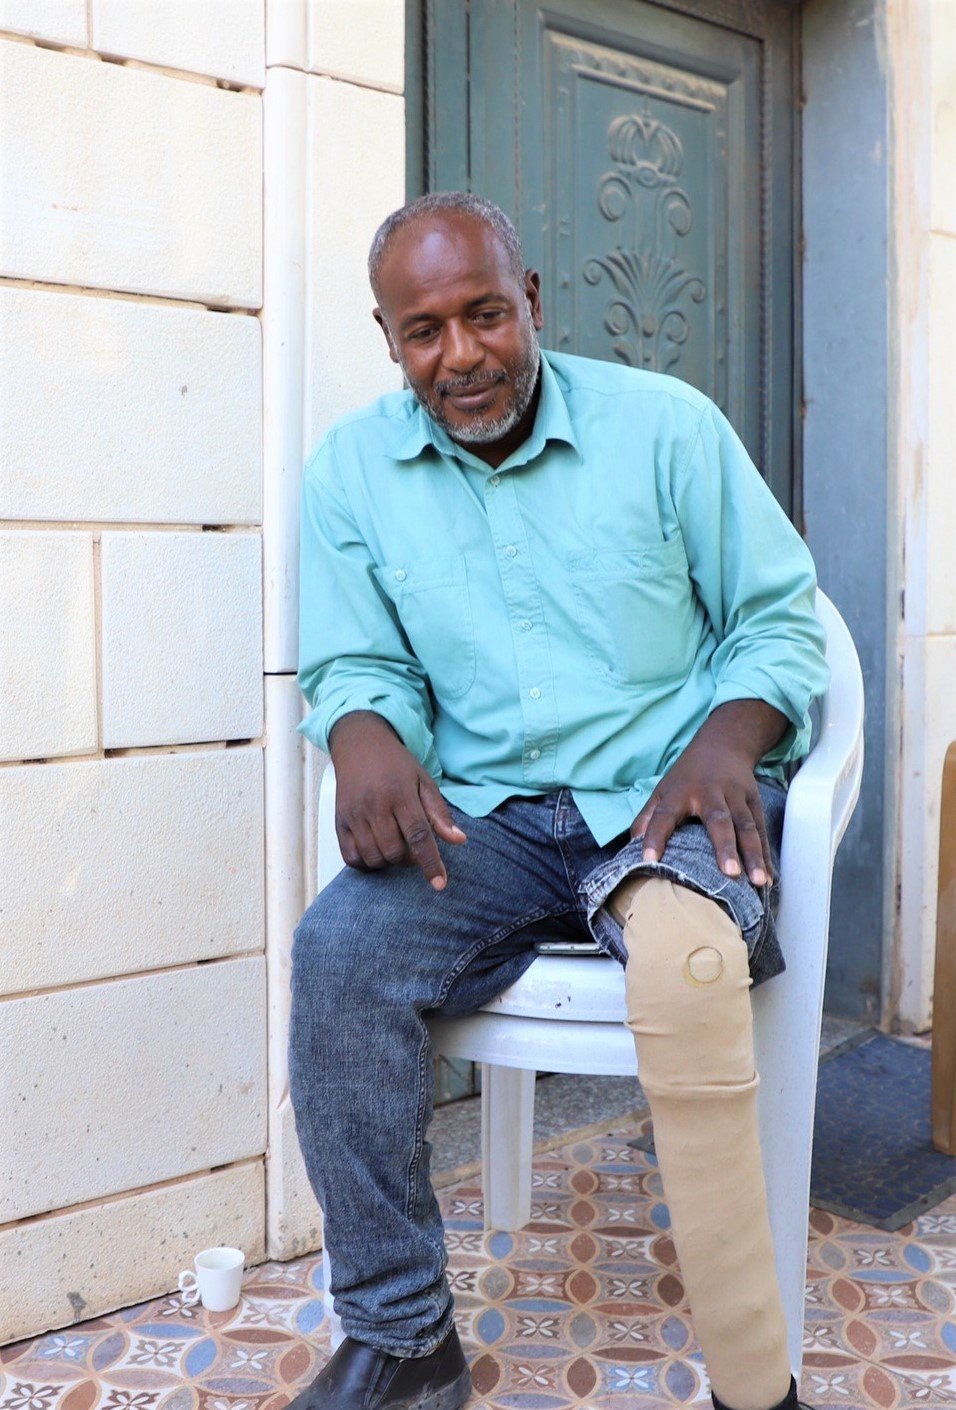 Joma'a Abu-Jabal shows the prosthetic leg he uses after Israeli forces shot his leg which was later amputated